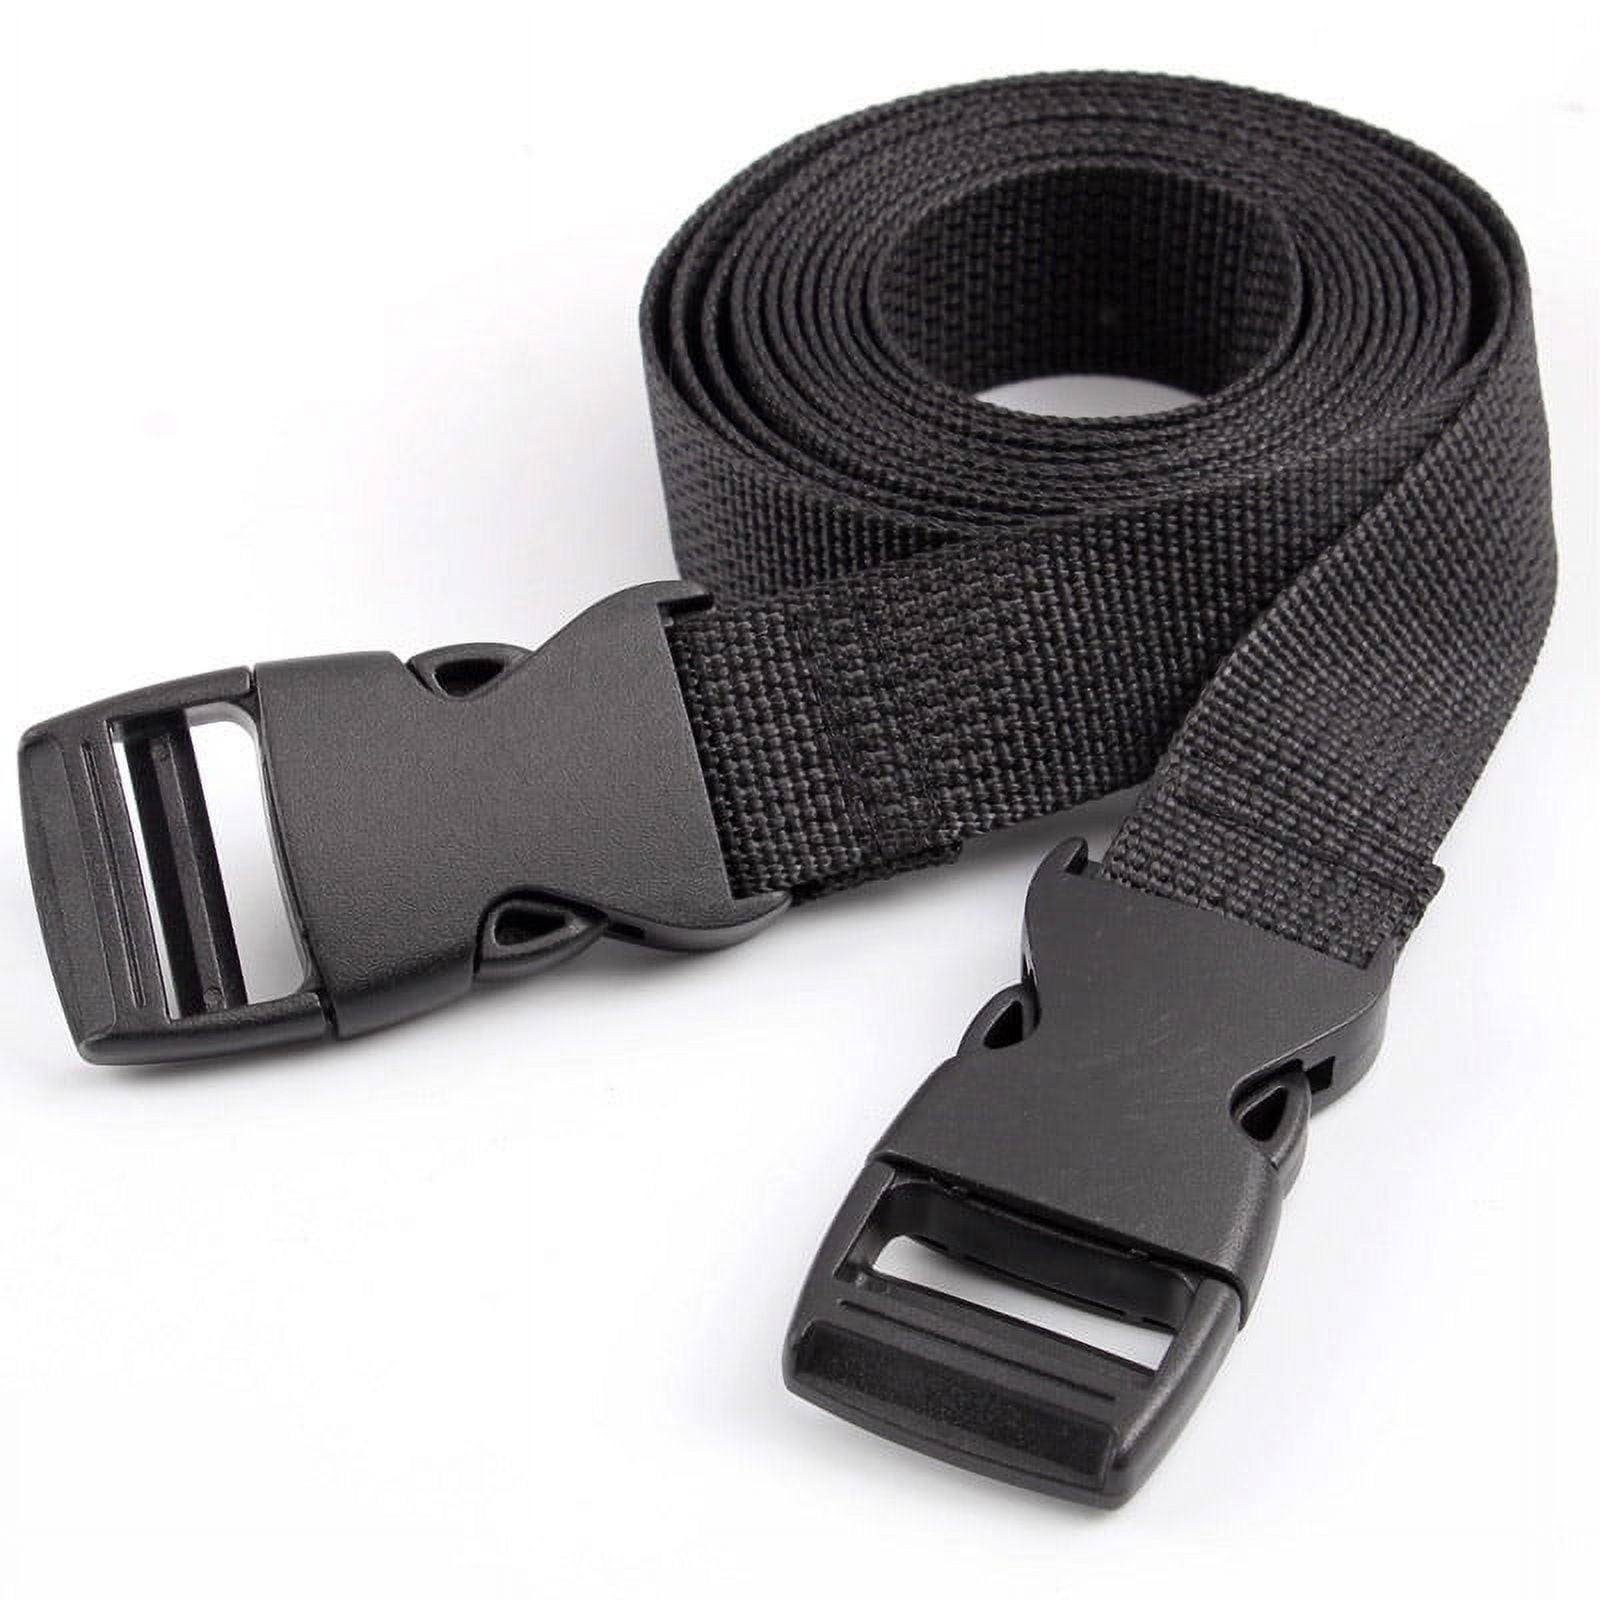 2Pcs Adjustable Nylon Bind Band Strap Utility Strap with Quick-Release  Buckle Great for Backpacking, Air Mattresses, Luggage, Tent